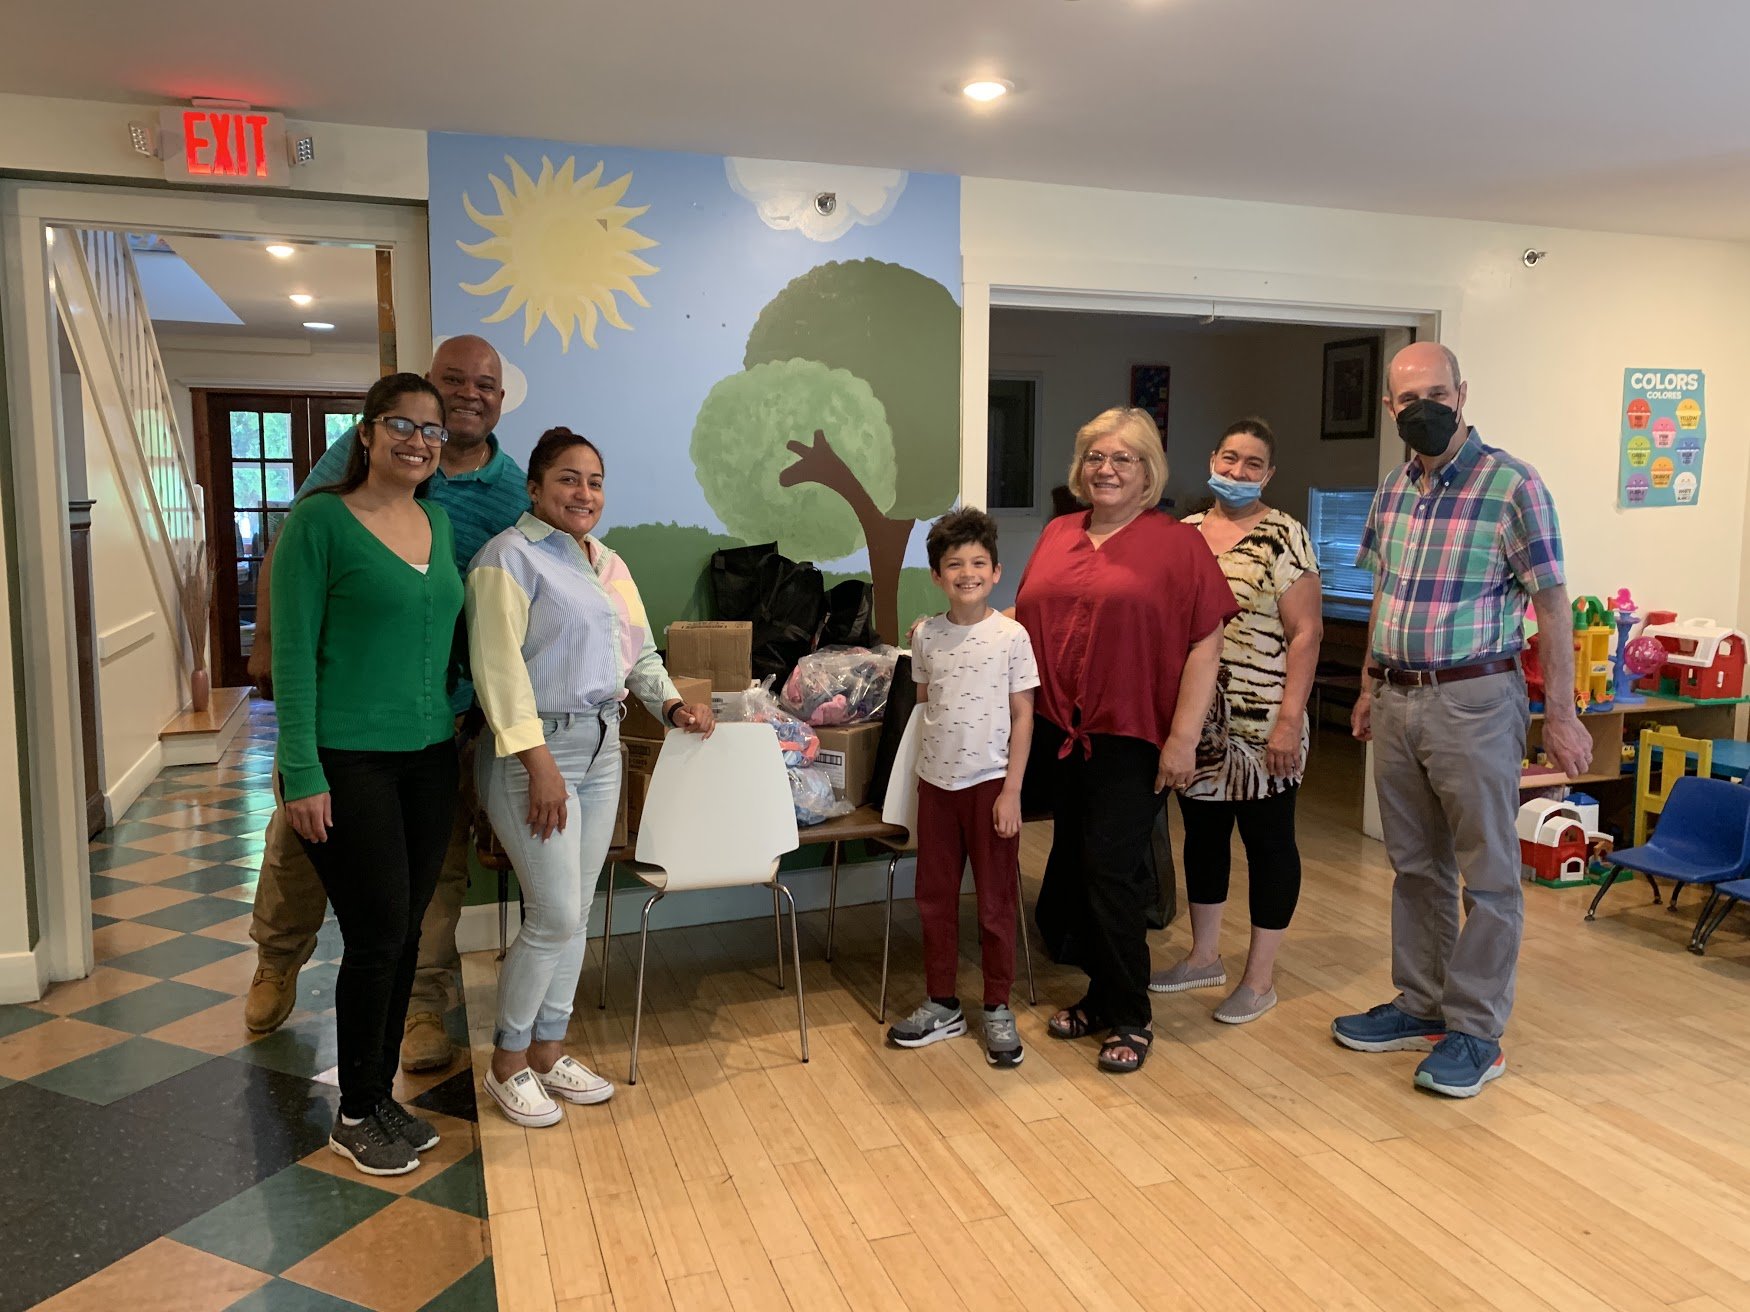  Operations Manager Jody Barnet and Board Member/Volunteer Bruce Goody visited one of Circle of Hope's partner family shelters, bringing clothing and essentials for the families to support health and dignity this summer. 